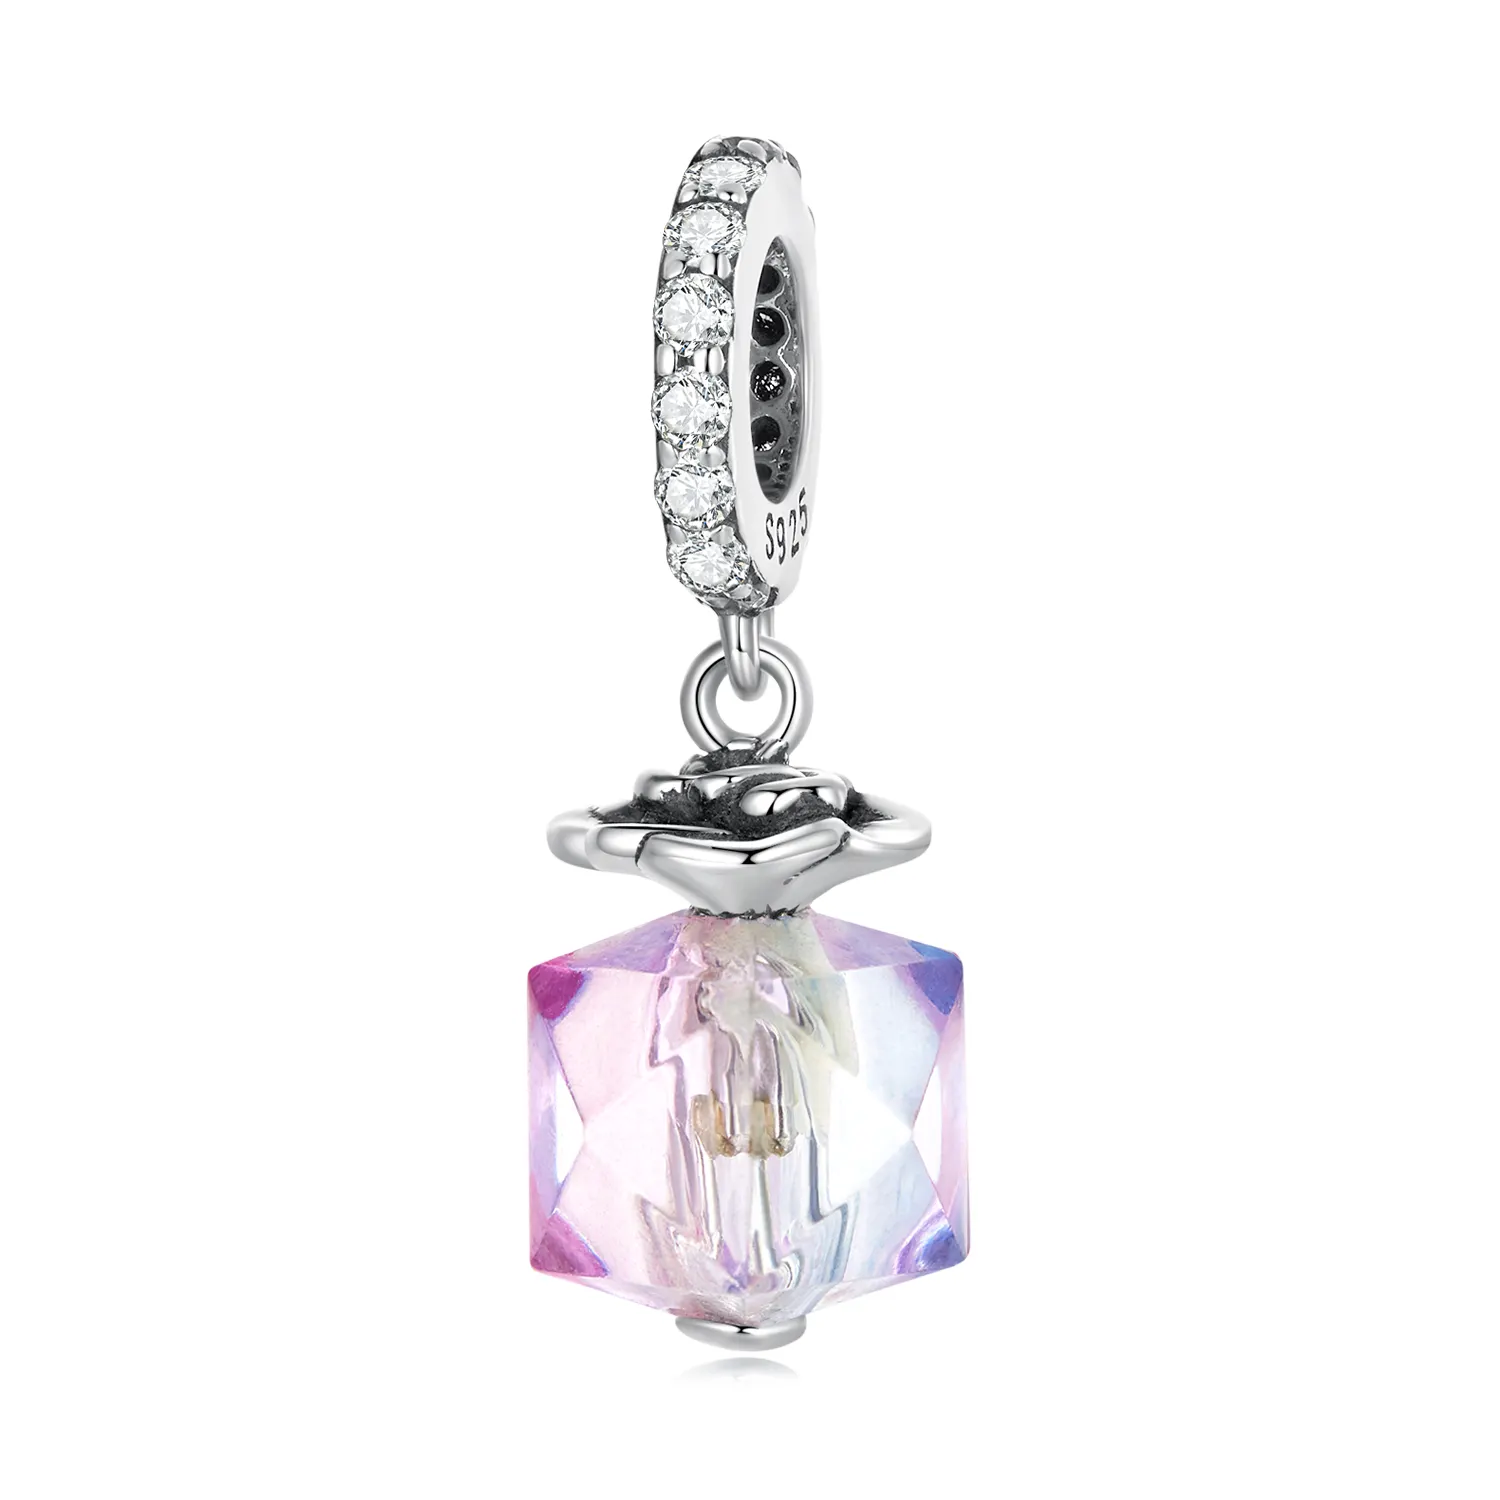 Crystal sparkling perfume rose pendant charm light luxury niche s925 silver charm beaded SCC2312